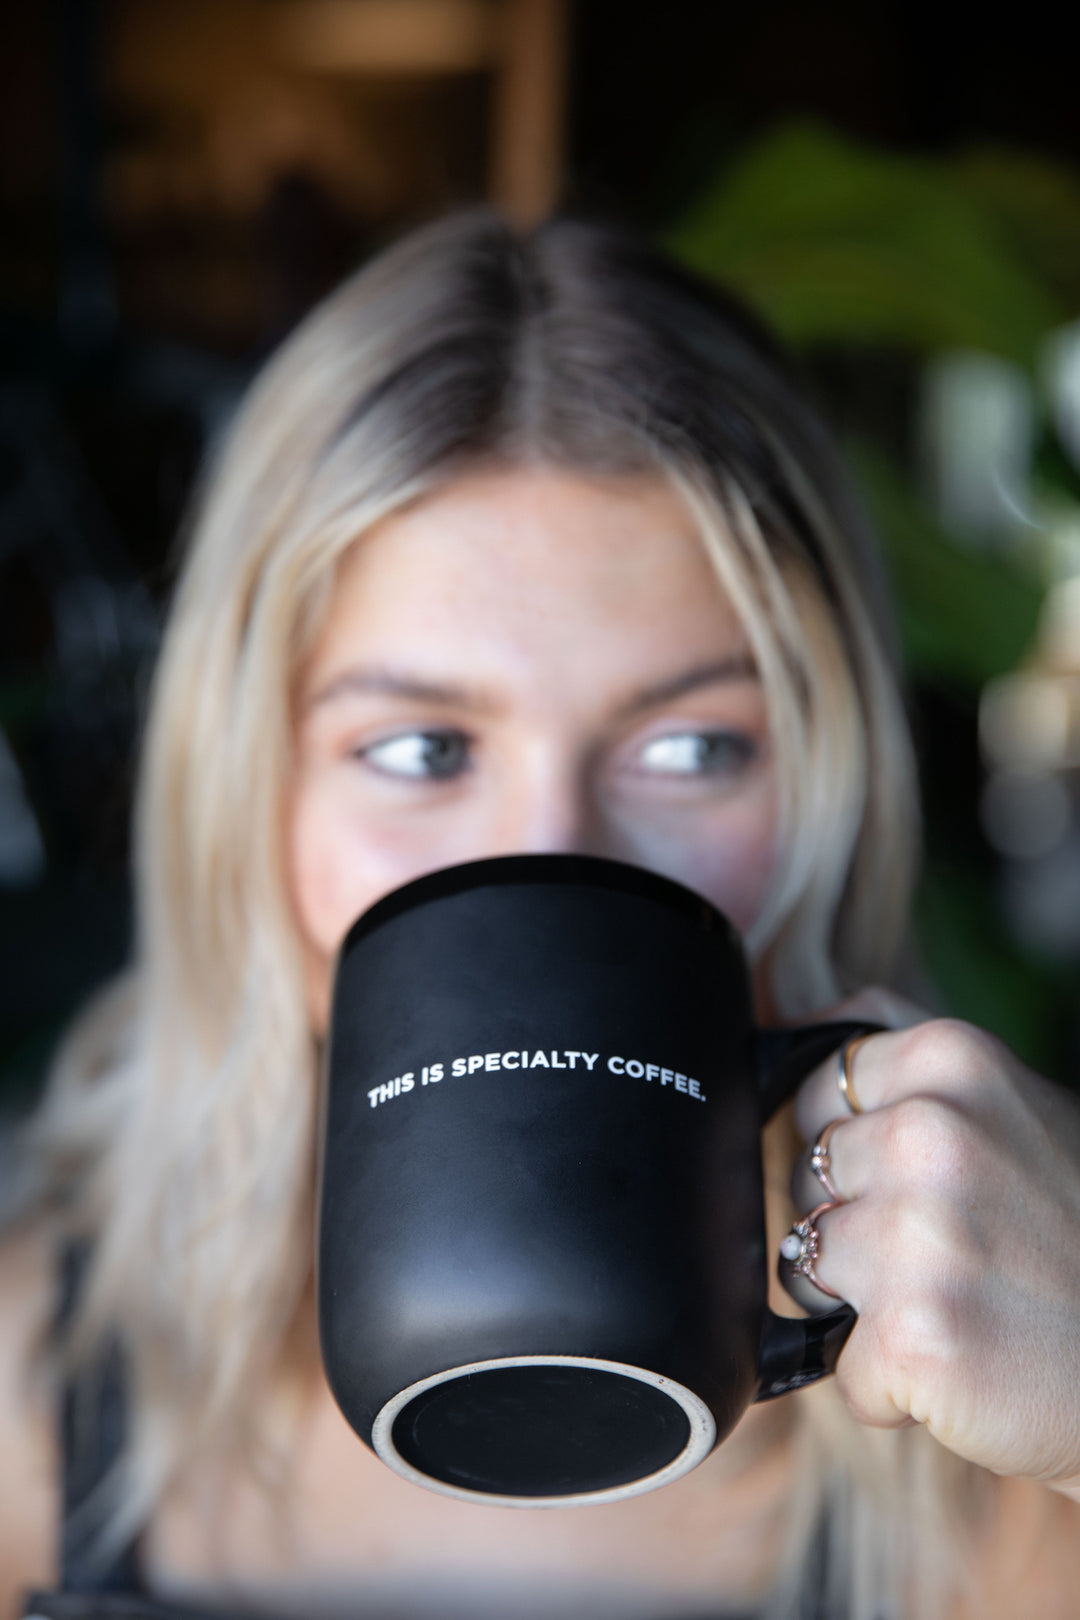 A LADY DRINKING WITH THE SPECIALTY COFFEE MUG